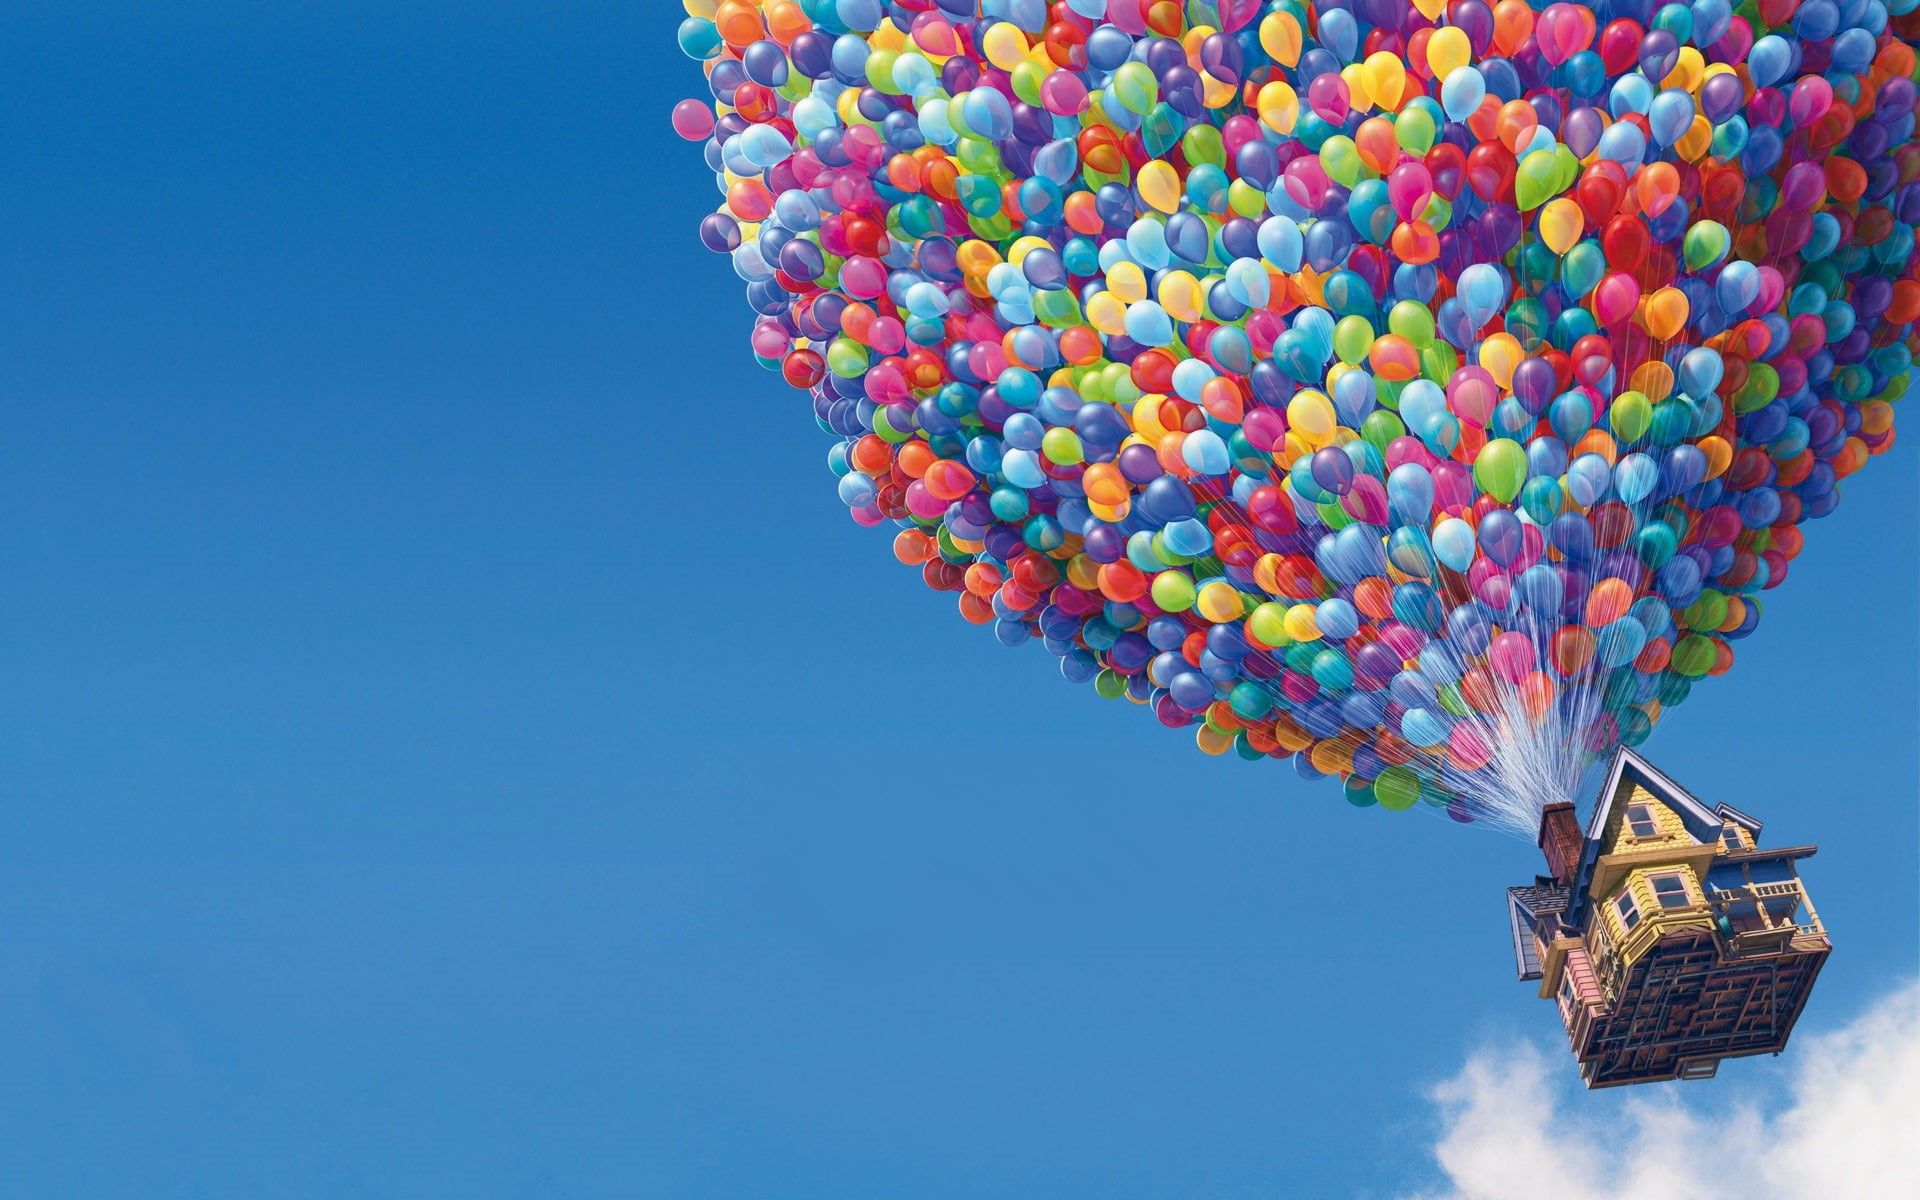 Balloons flying in the sky - Hot air balloons